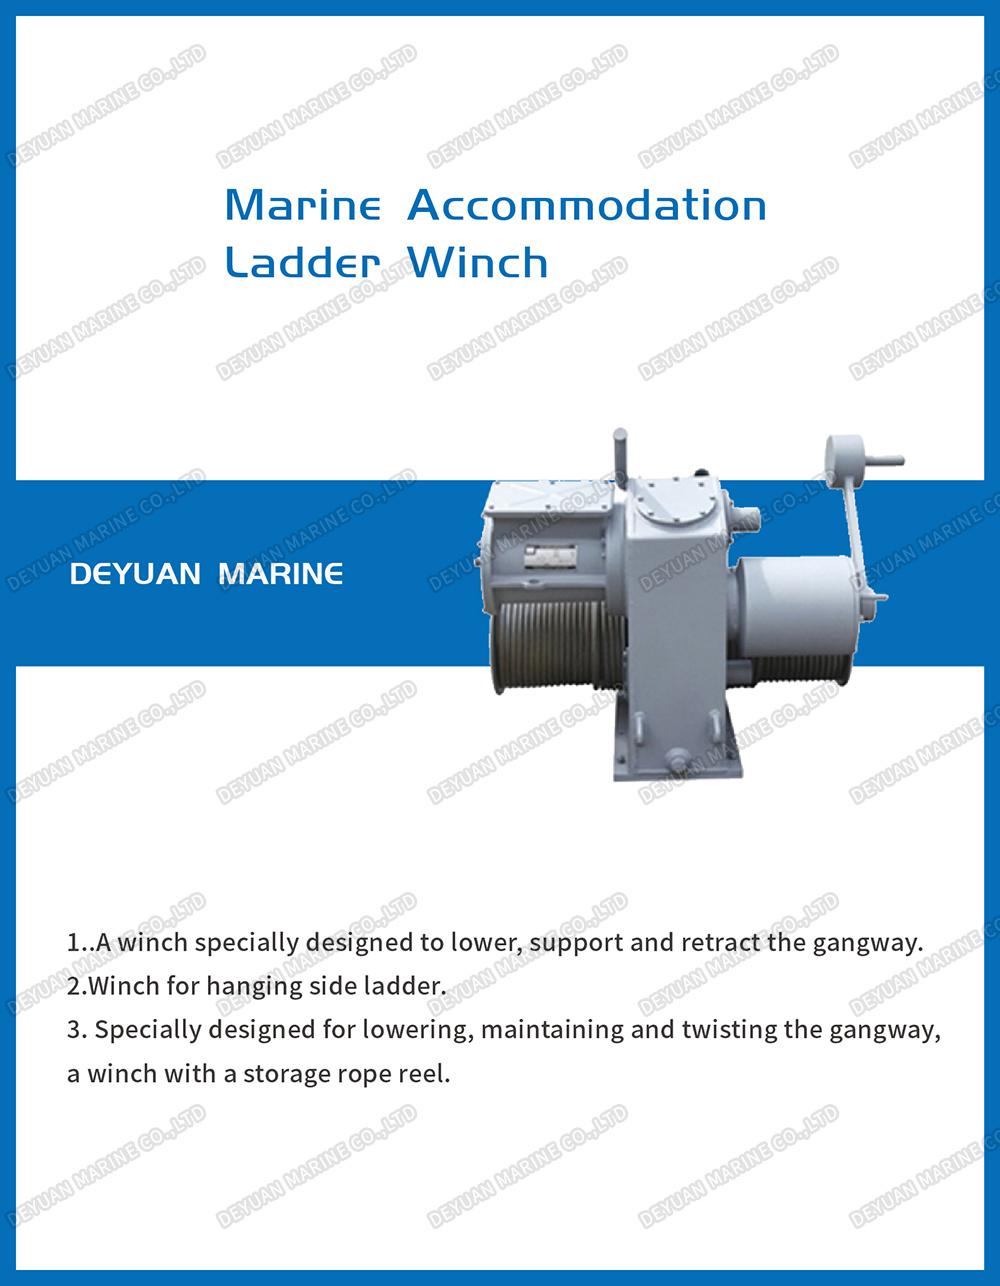 Marine Electric Accommodation Ladder Winches